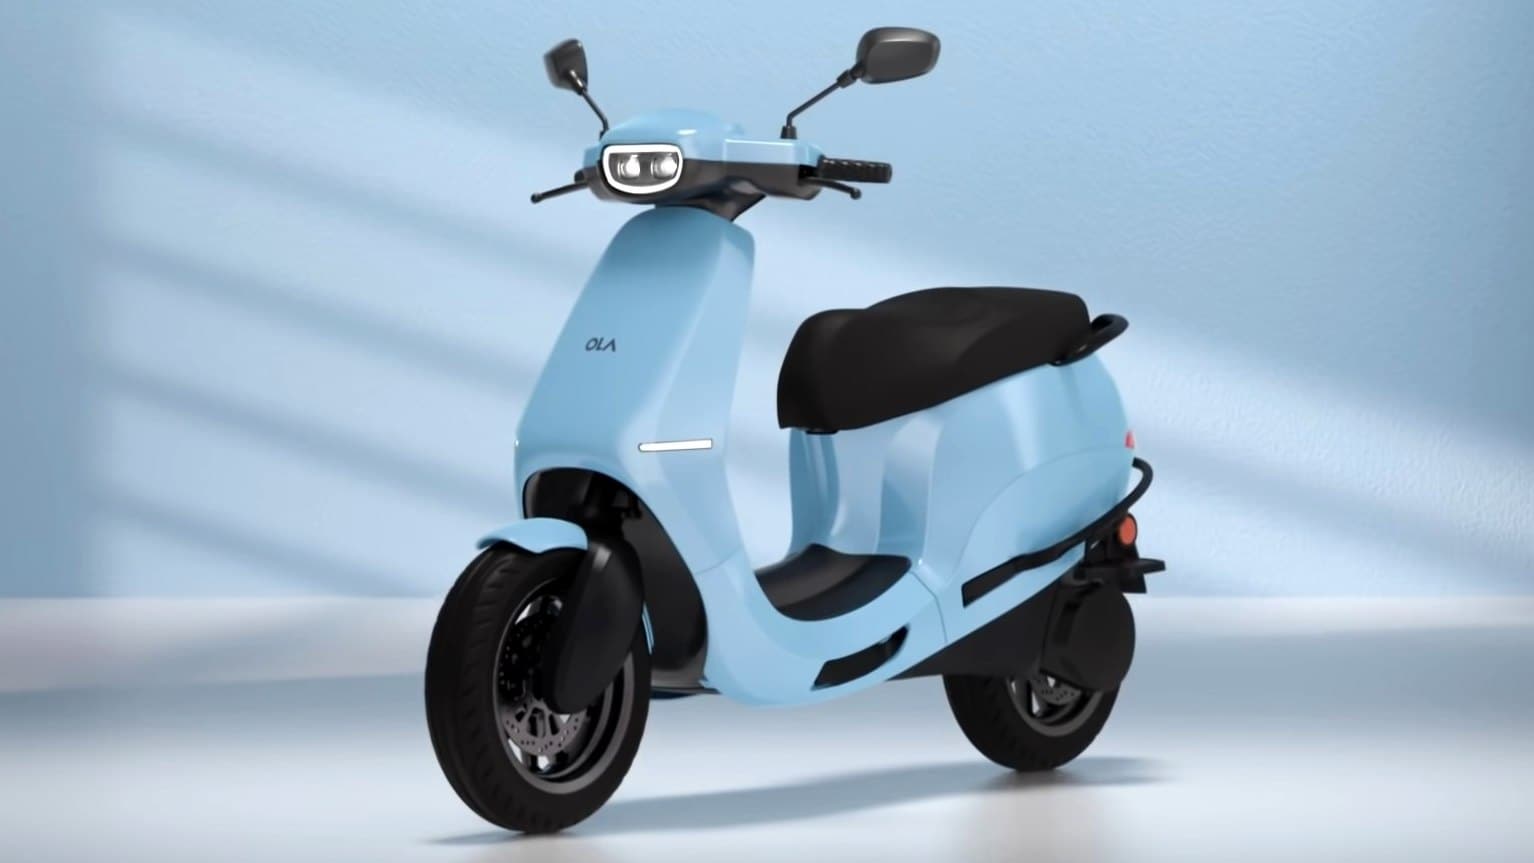 In S1 Pro form, the Ola Electric scooter is expected to get a battery of close to 3.6 kWh capacity. Image: Ola Electric